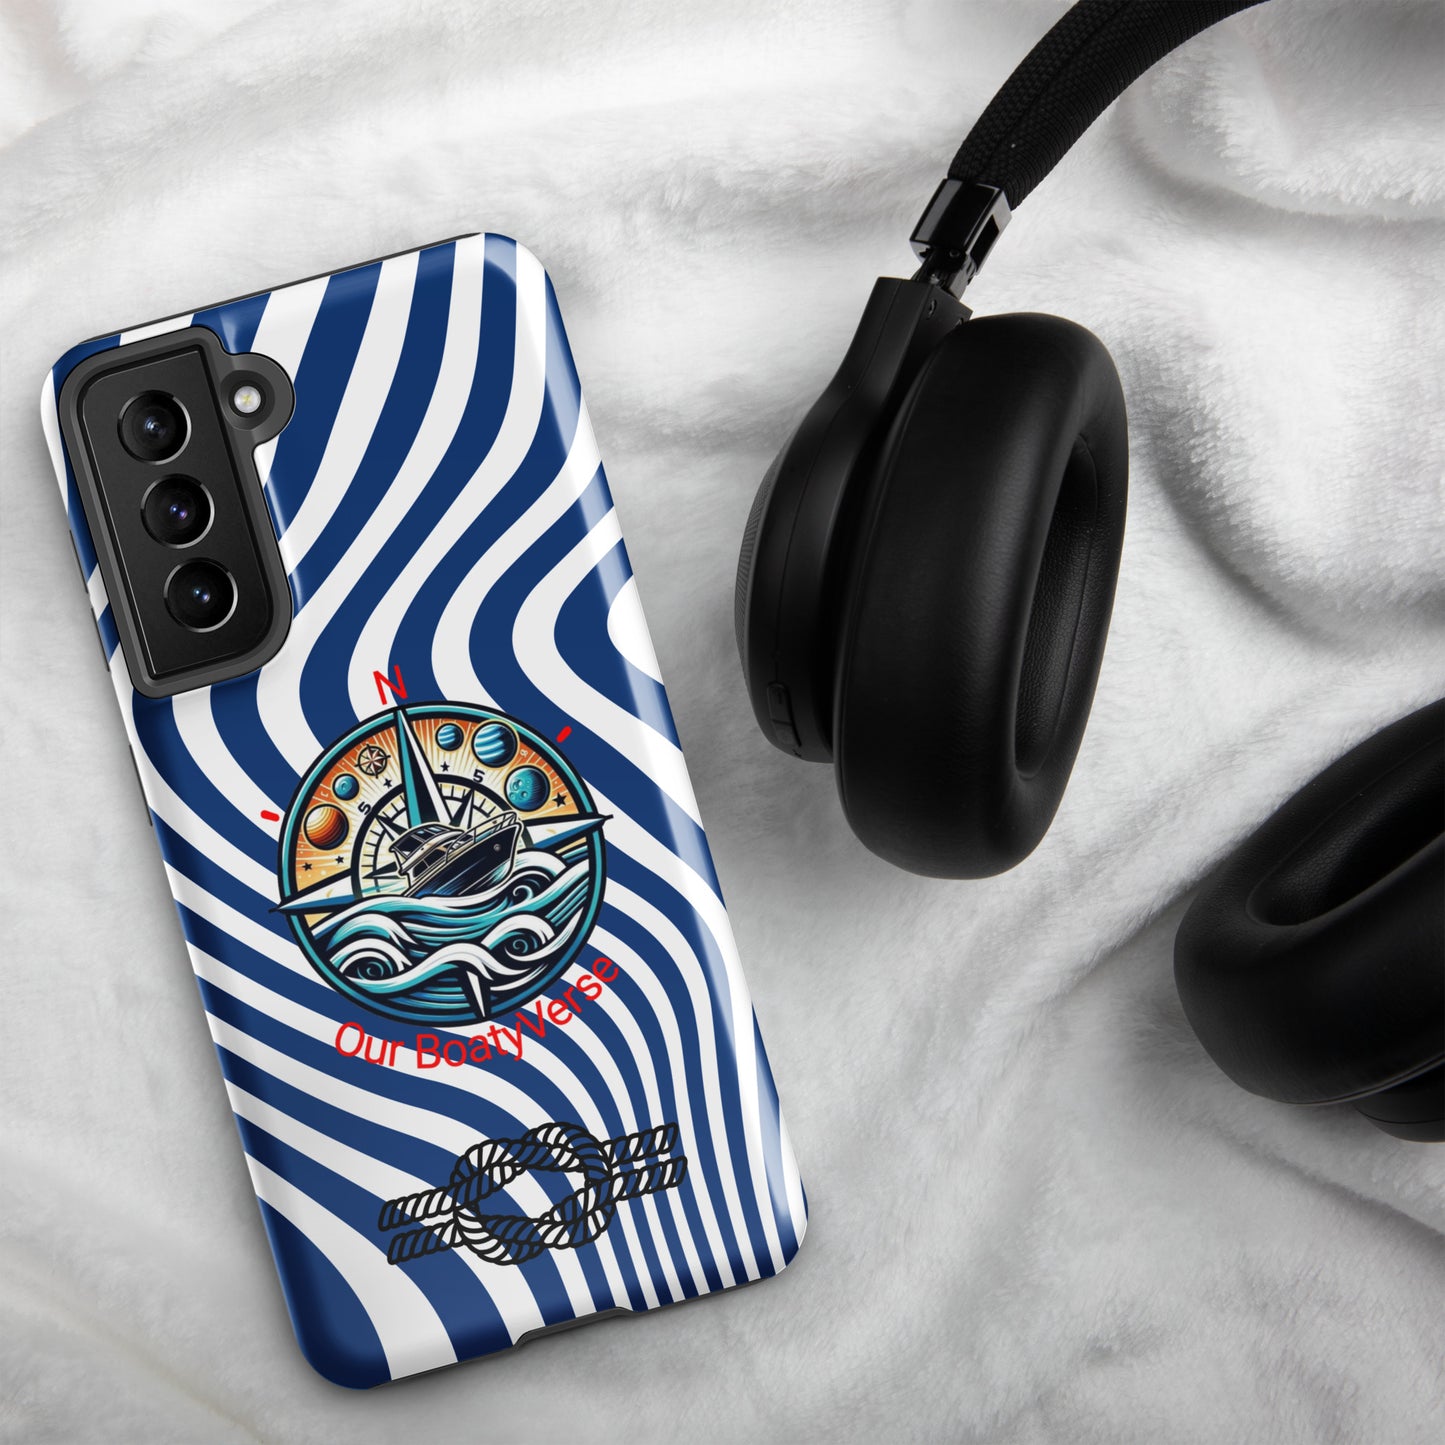 Bright Tough case for Samsung® phones by Our BoatyVerse